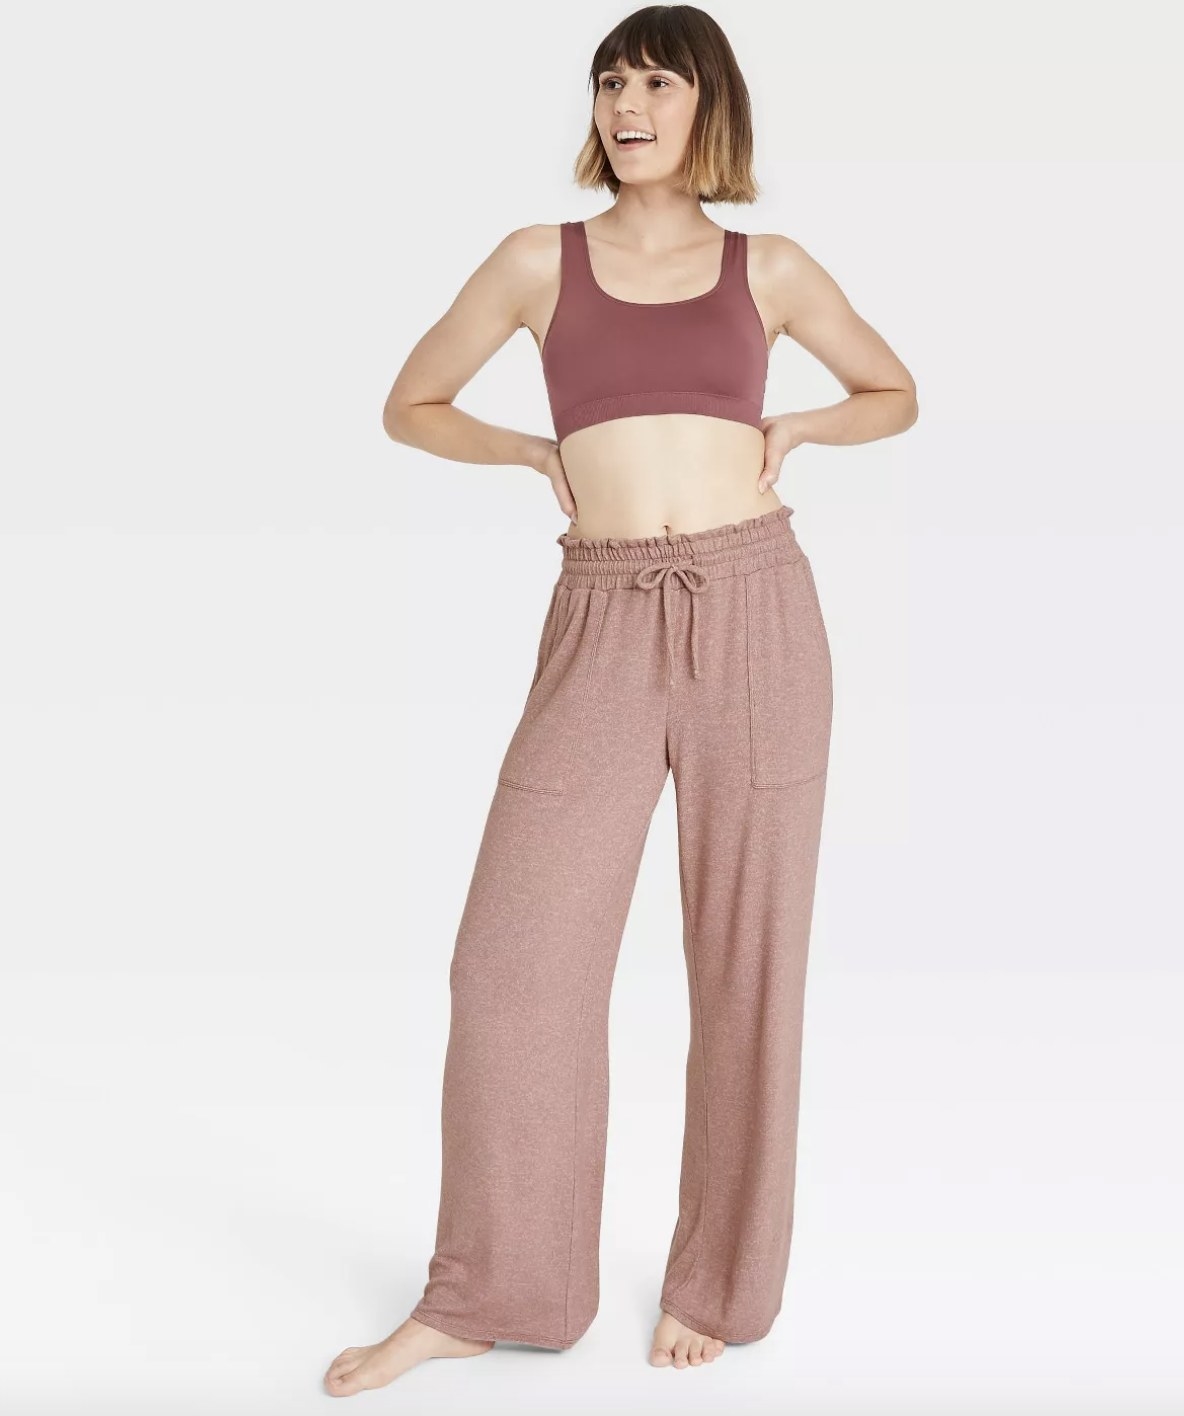 An adult is wearing a pair of mauve loose-fitting sweatpants